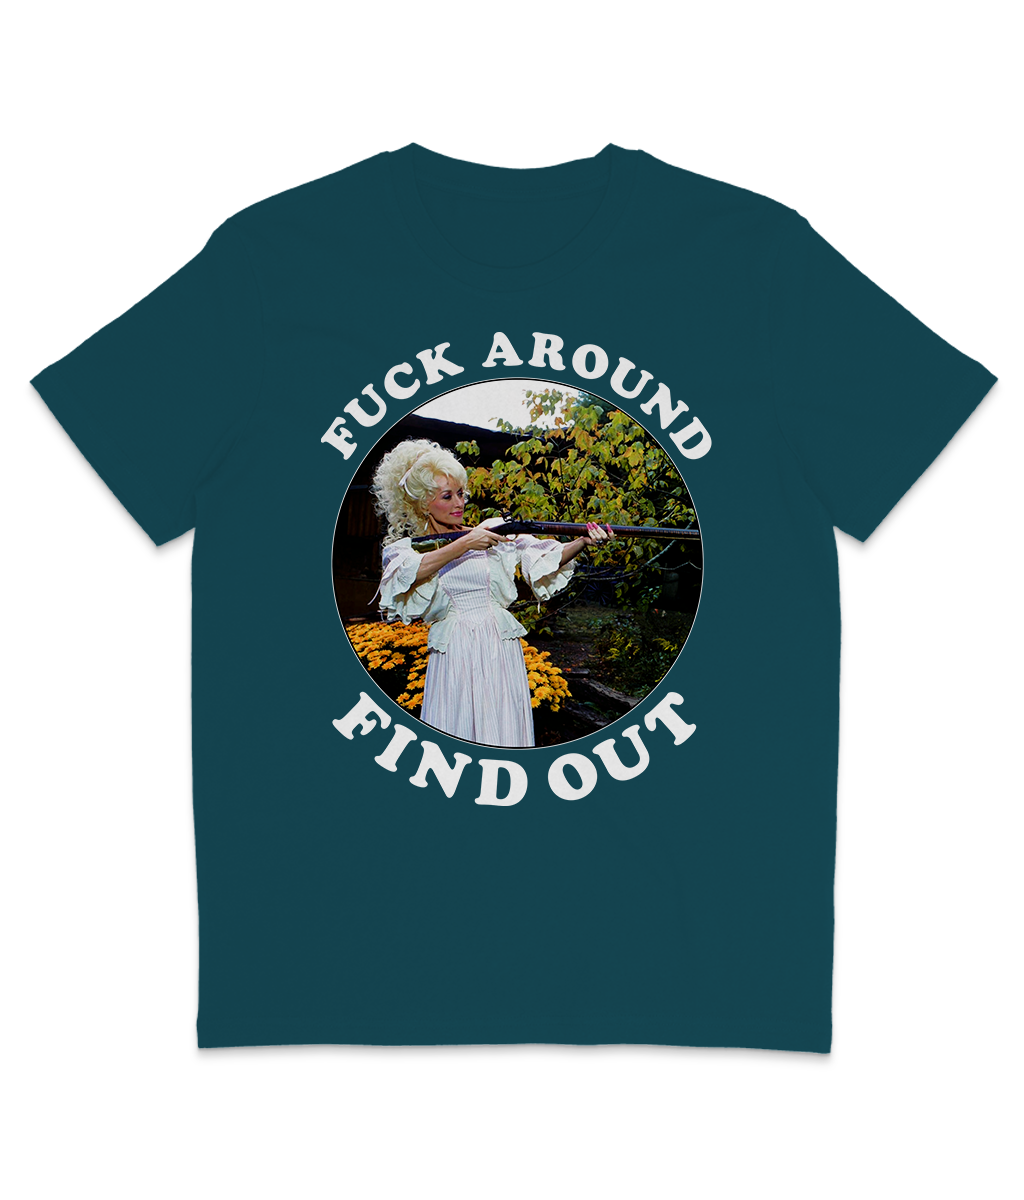 F**k Around Find Out - White Text